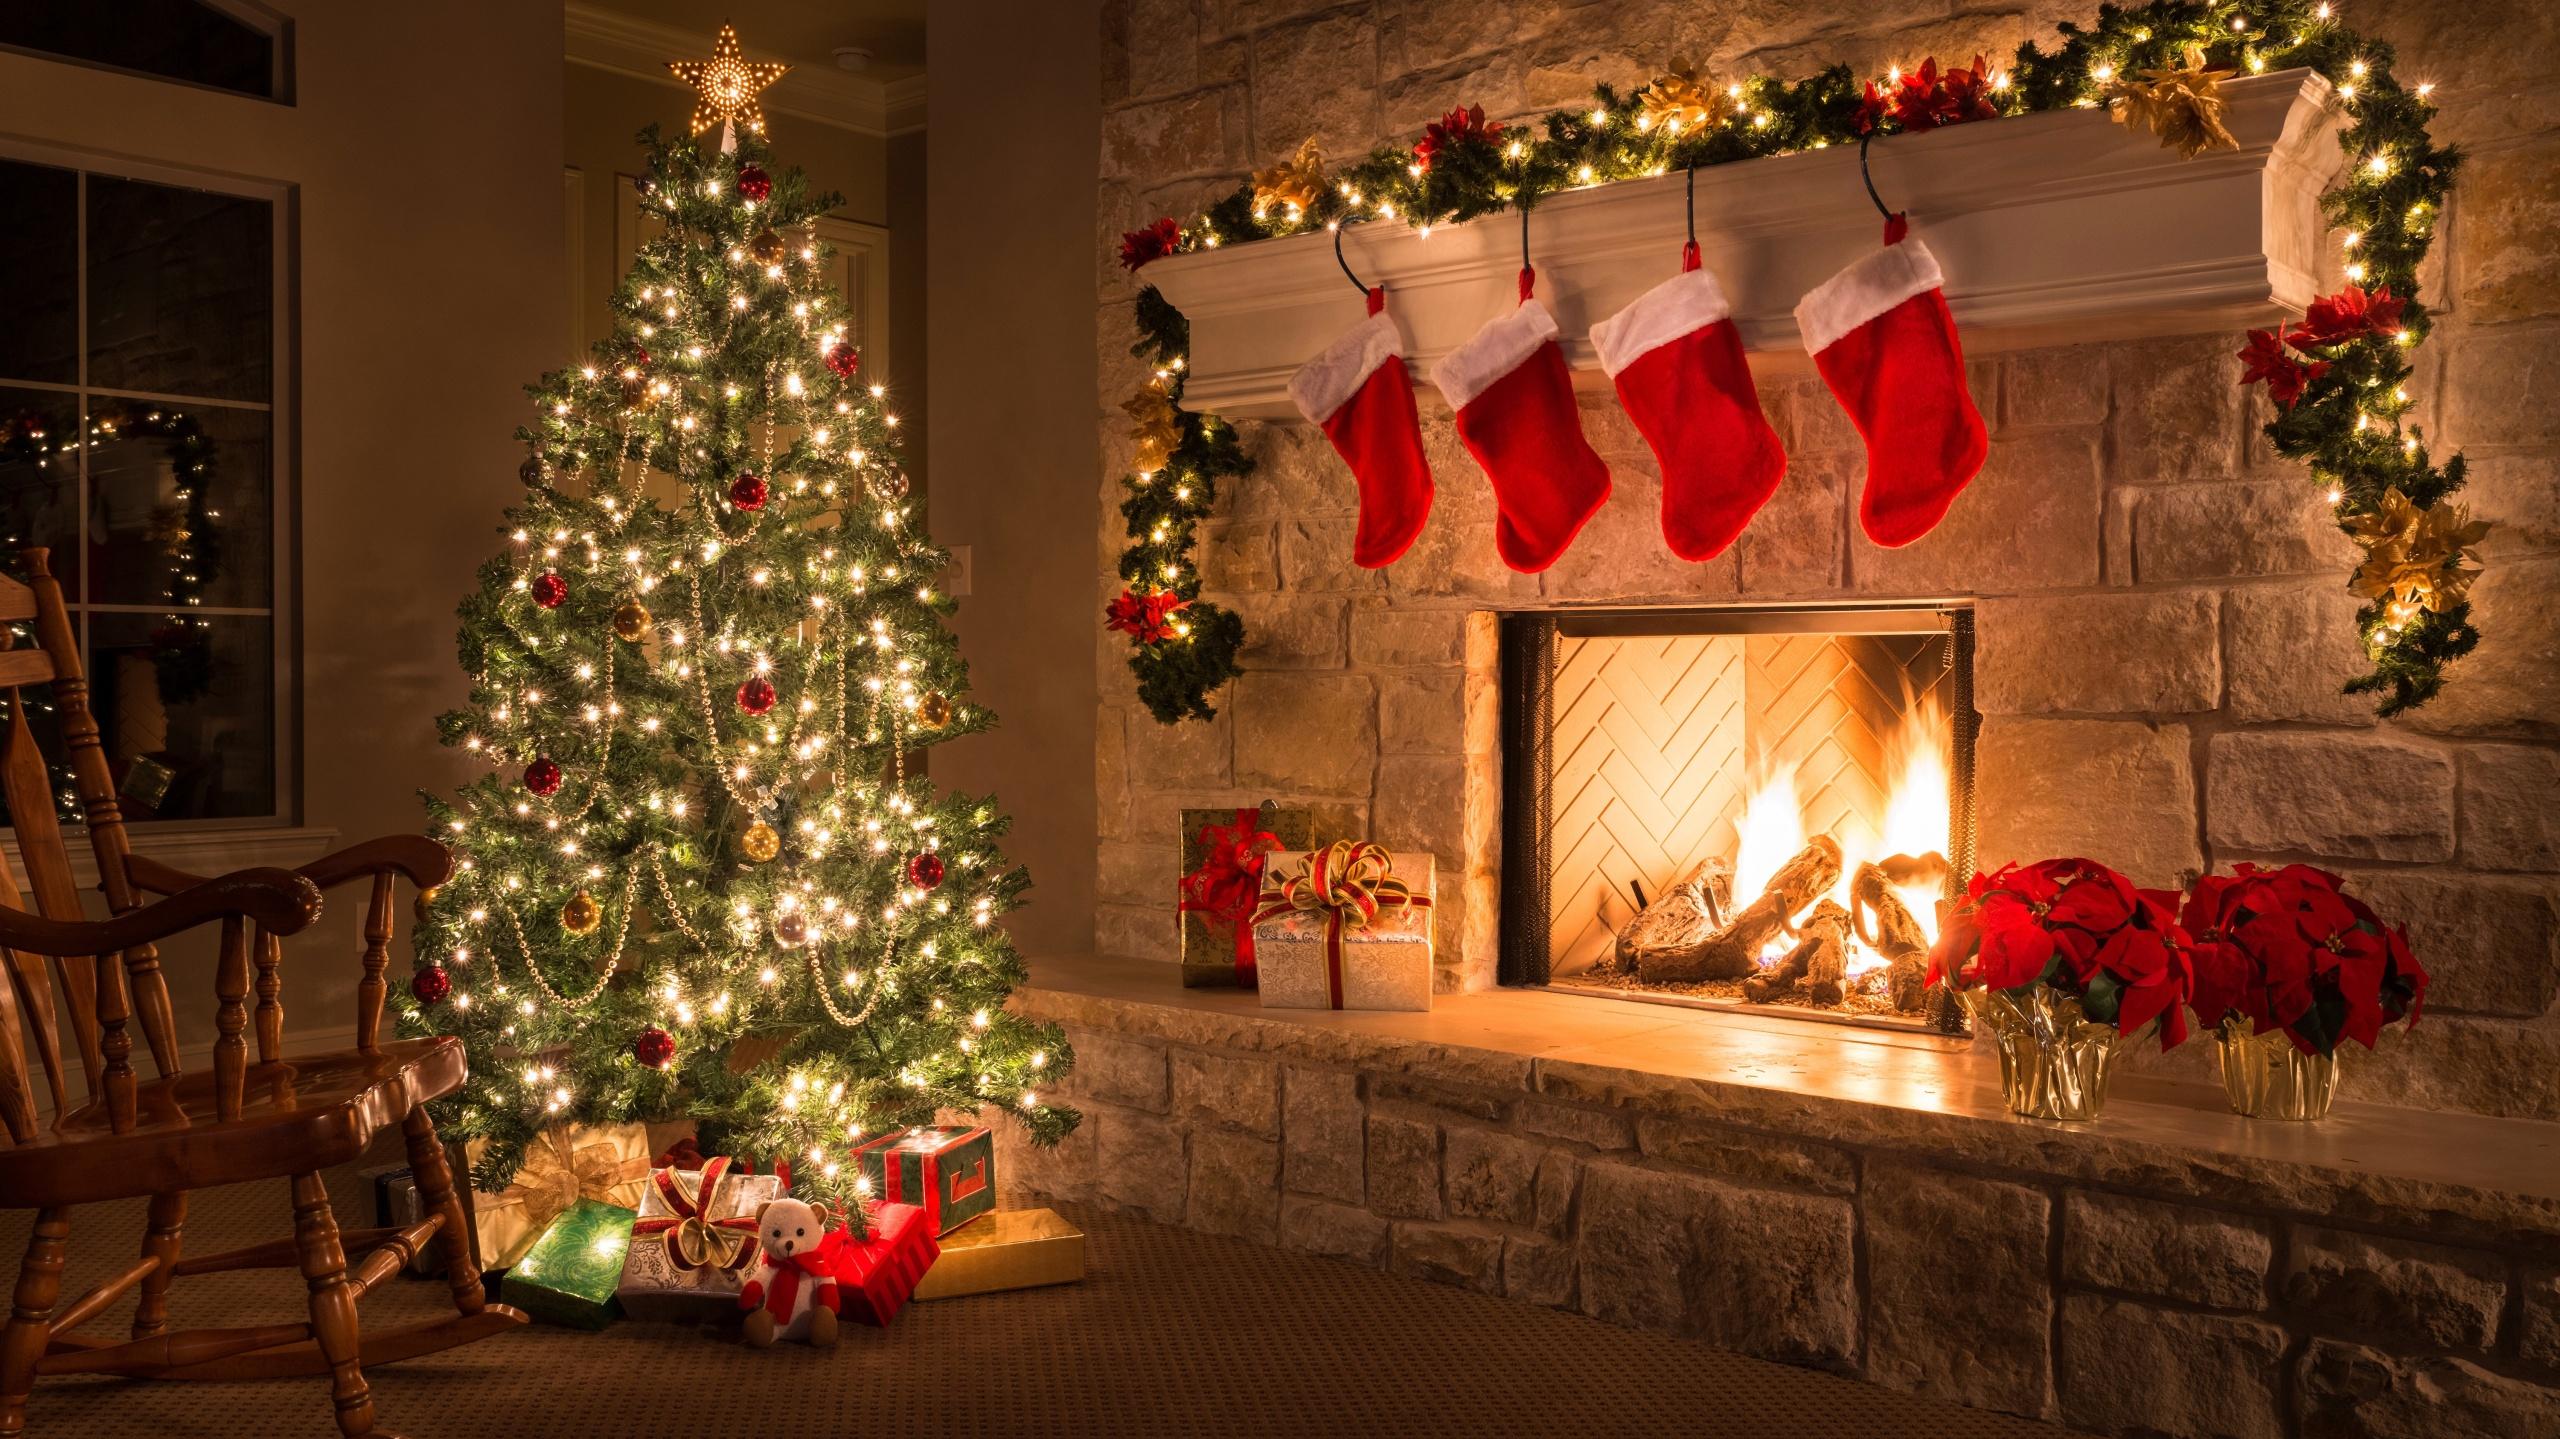 Is Your Christmas Tree A Fire Hazard Experts Share Holiday Safety